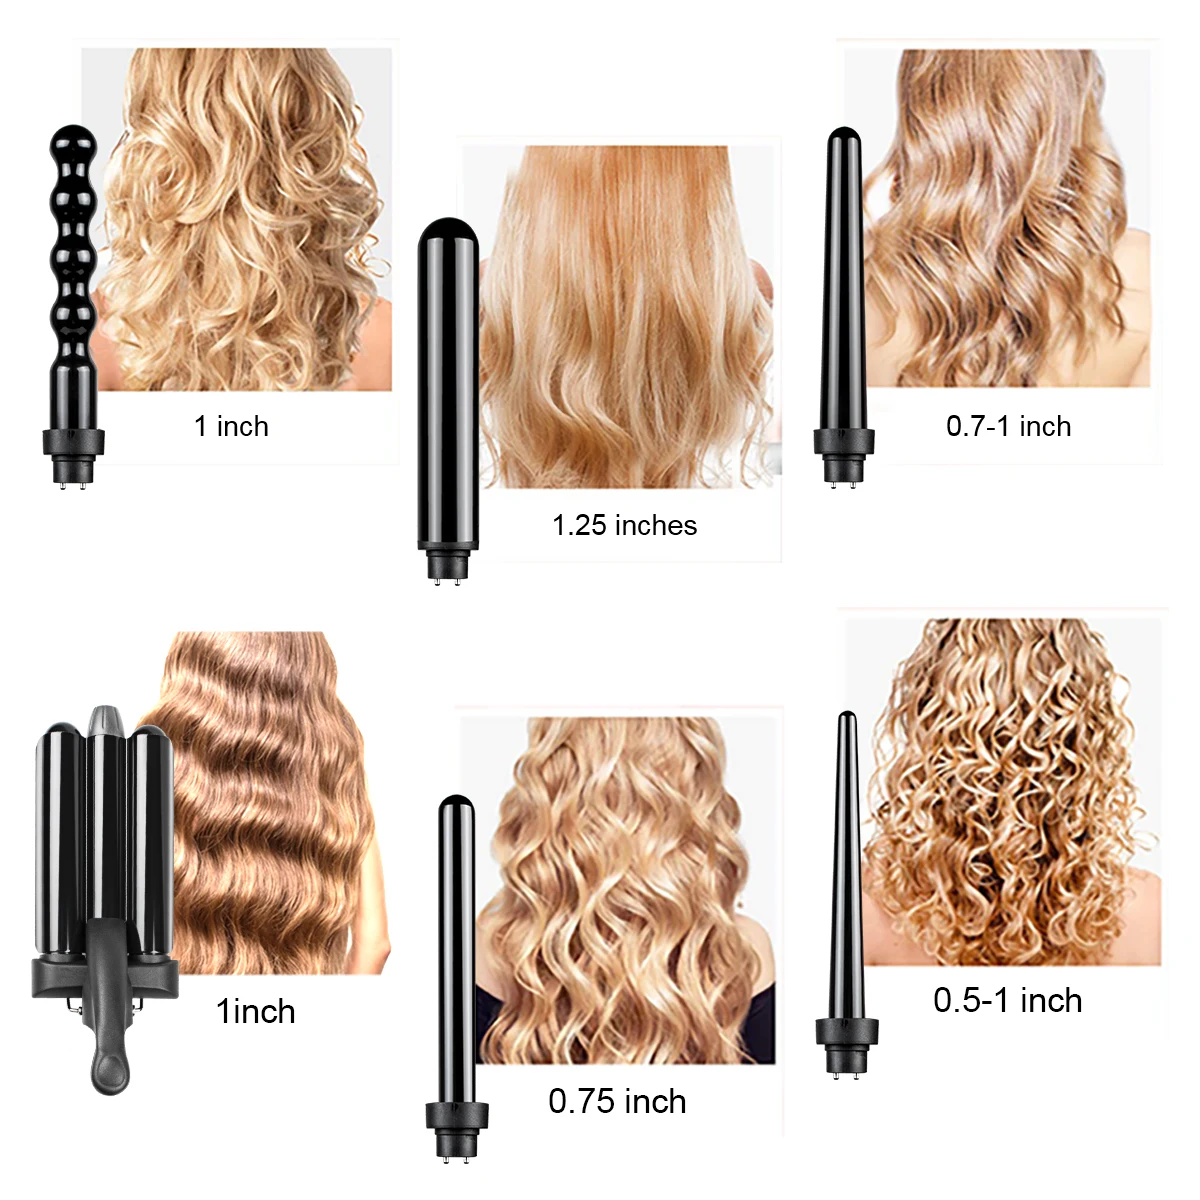 Hair Curling Wand Interchangeable Barrels And Lcd Display Professional Hair  Curler - Buy Hair Curler Interchangeable Curling Iron Hair Curler Set Hair  Curling Wand Interchangeable Interchangeable Wand Curling Iron  Set,Interchageable Hair Curler